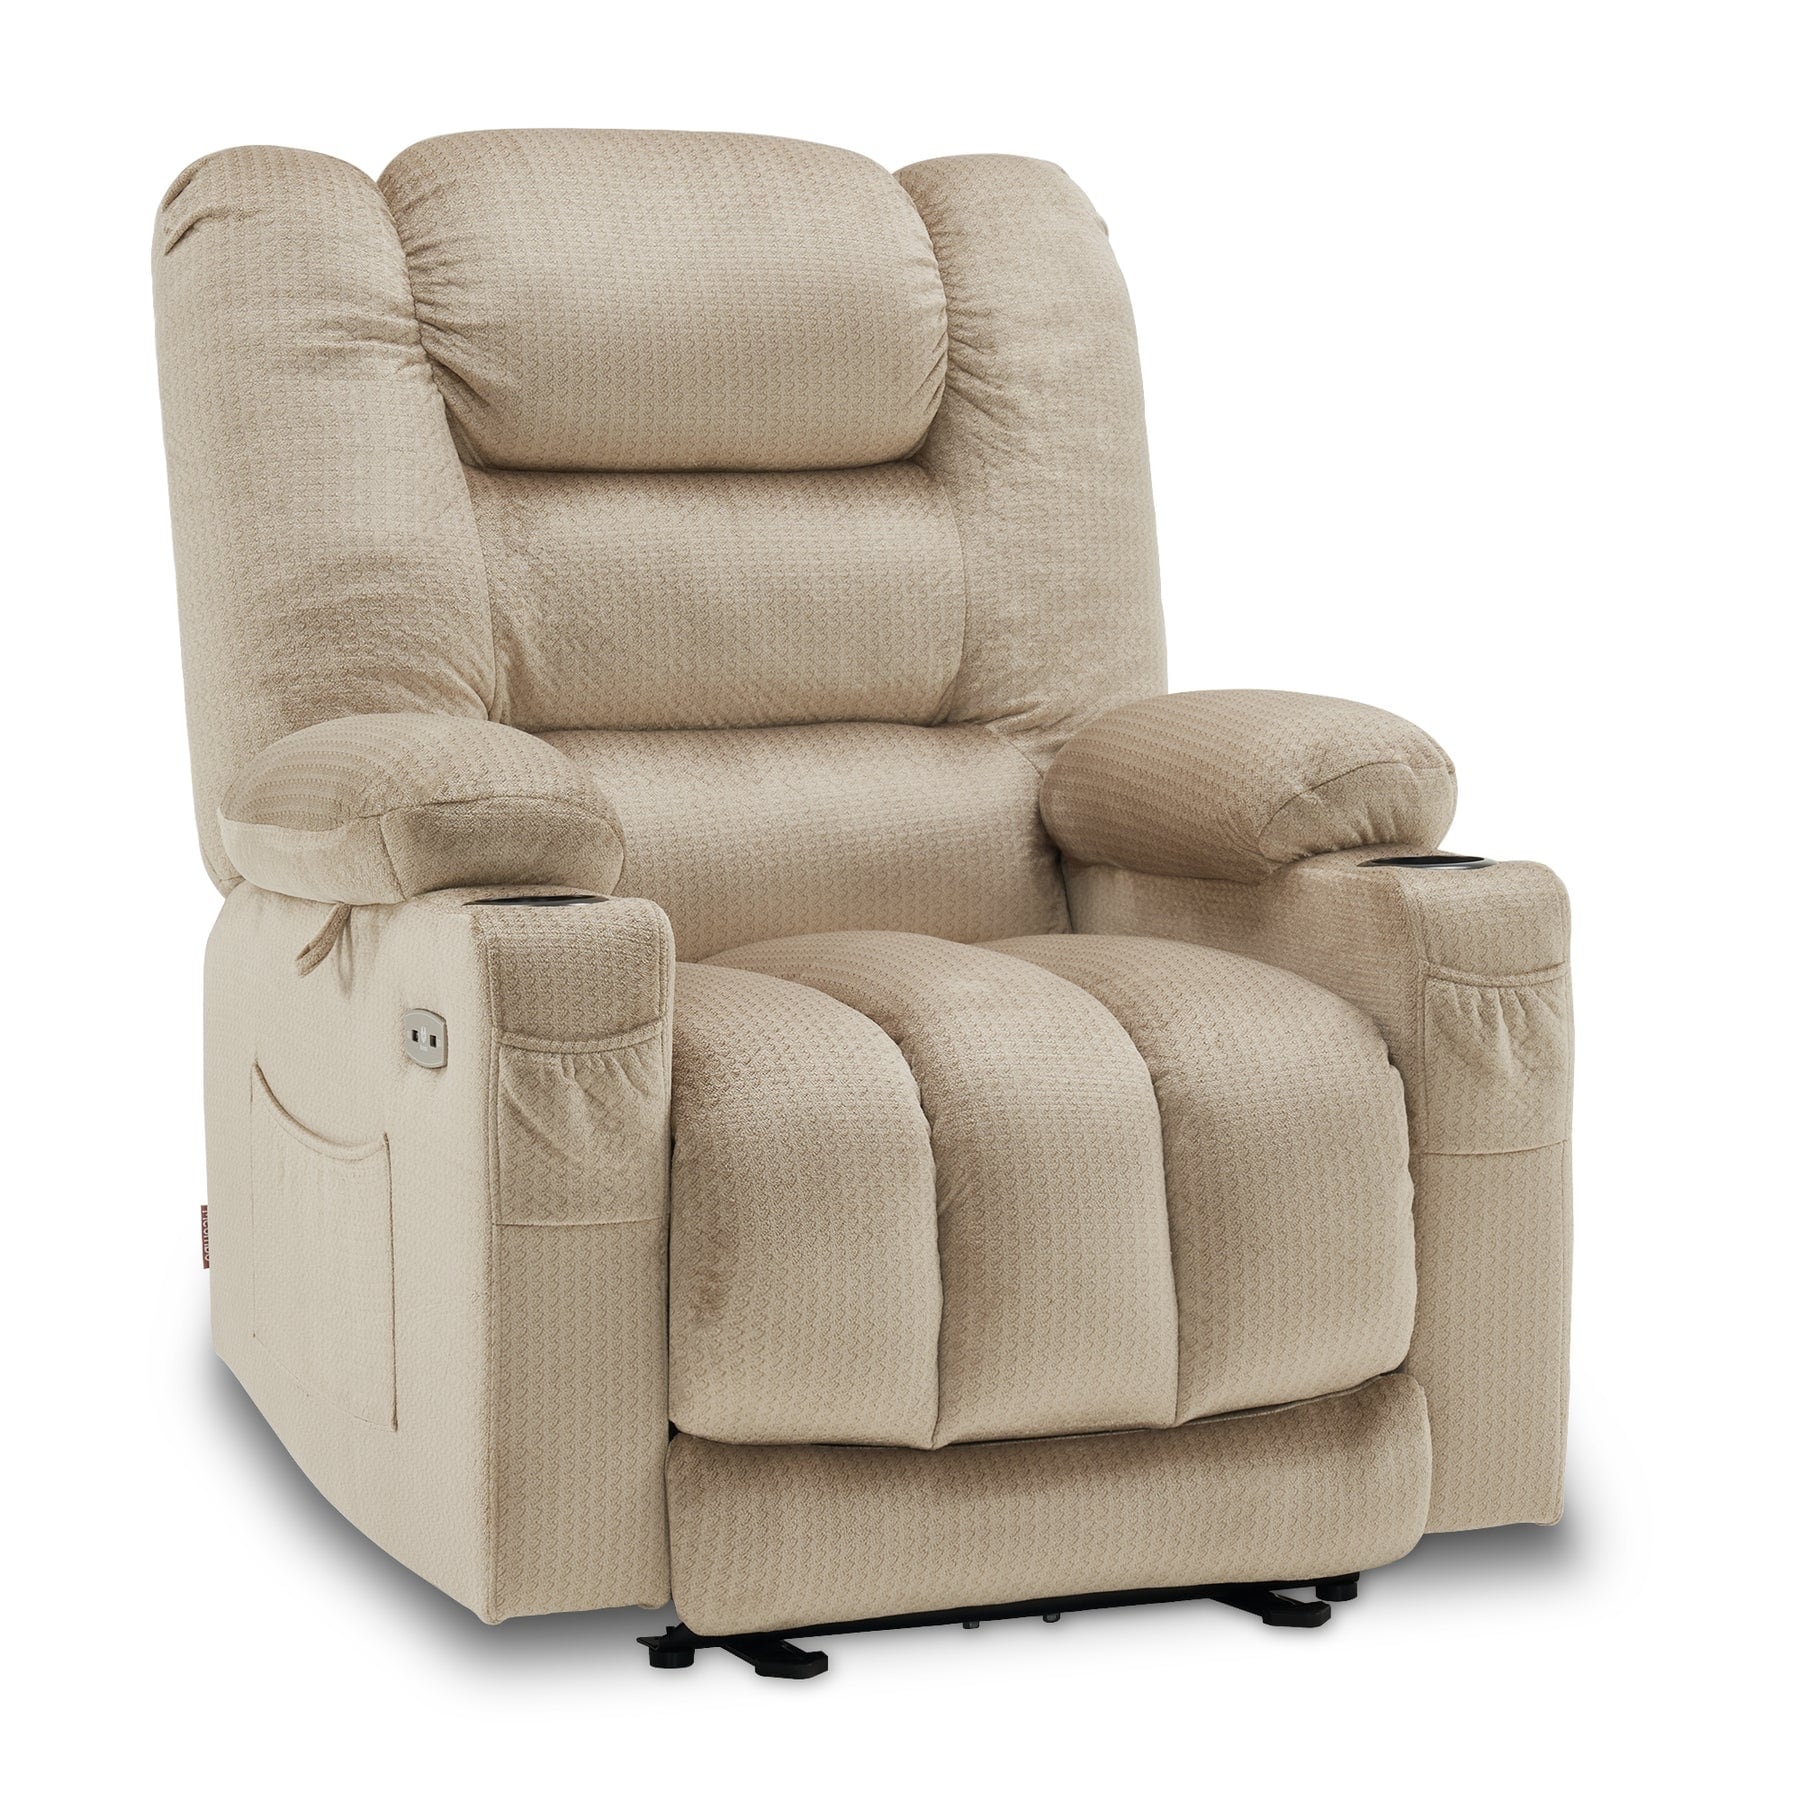 https://ak1.ostkcdn.com/images/products/is/images/direct/cbce514ed3d138bad4b4e1acce562de7f7477df6/Mcombo-Electric-Power-Recliner-Chair-with-Heat-and-Massage%2C-USB-Ports%2C-Cup-Holders%2C-Reclining-chair-for-Living-Room-6079.jpg